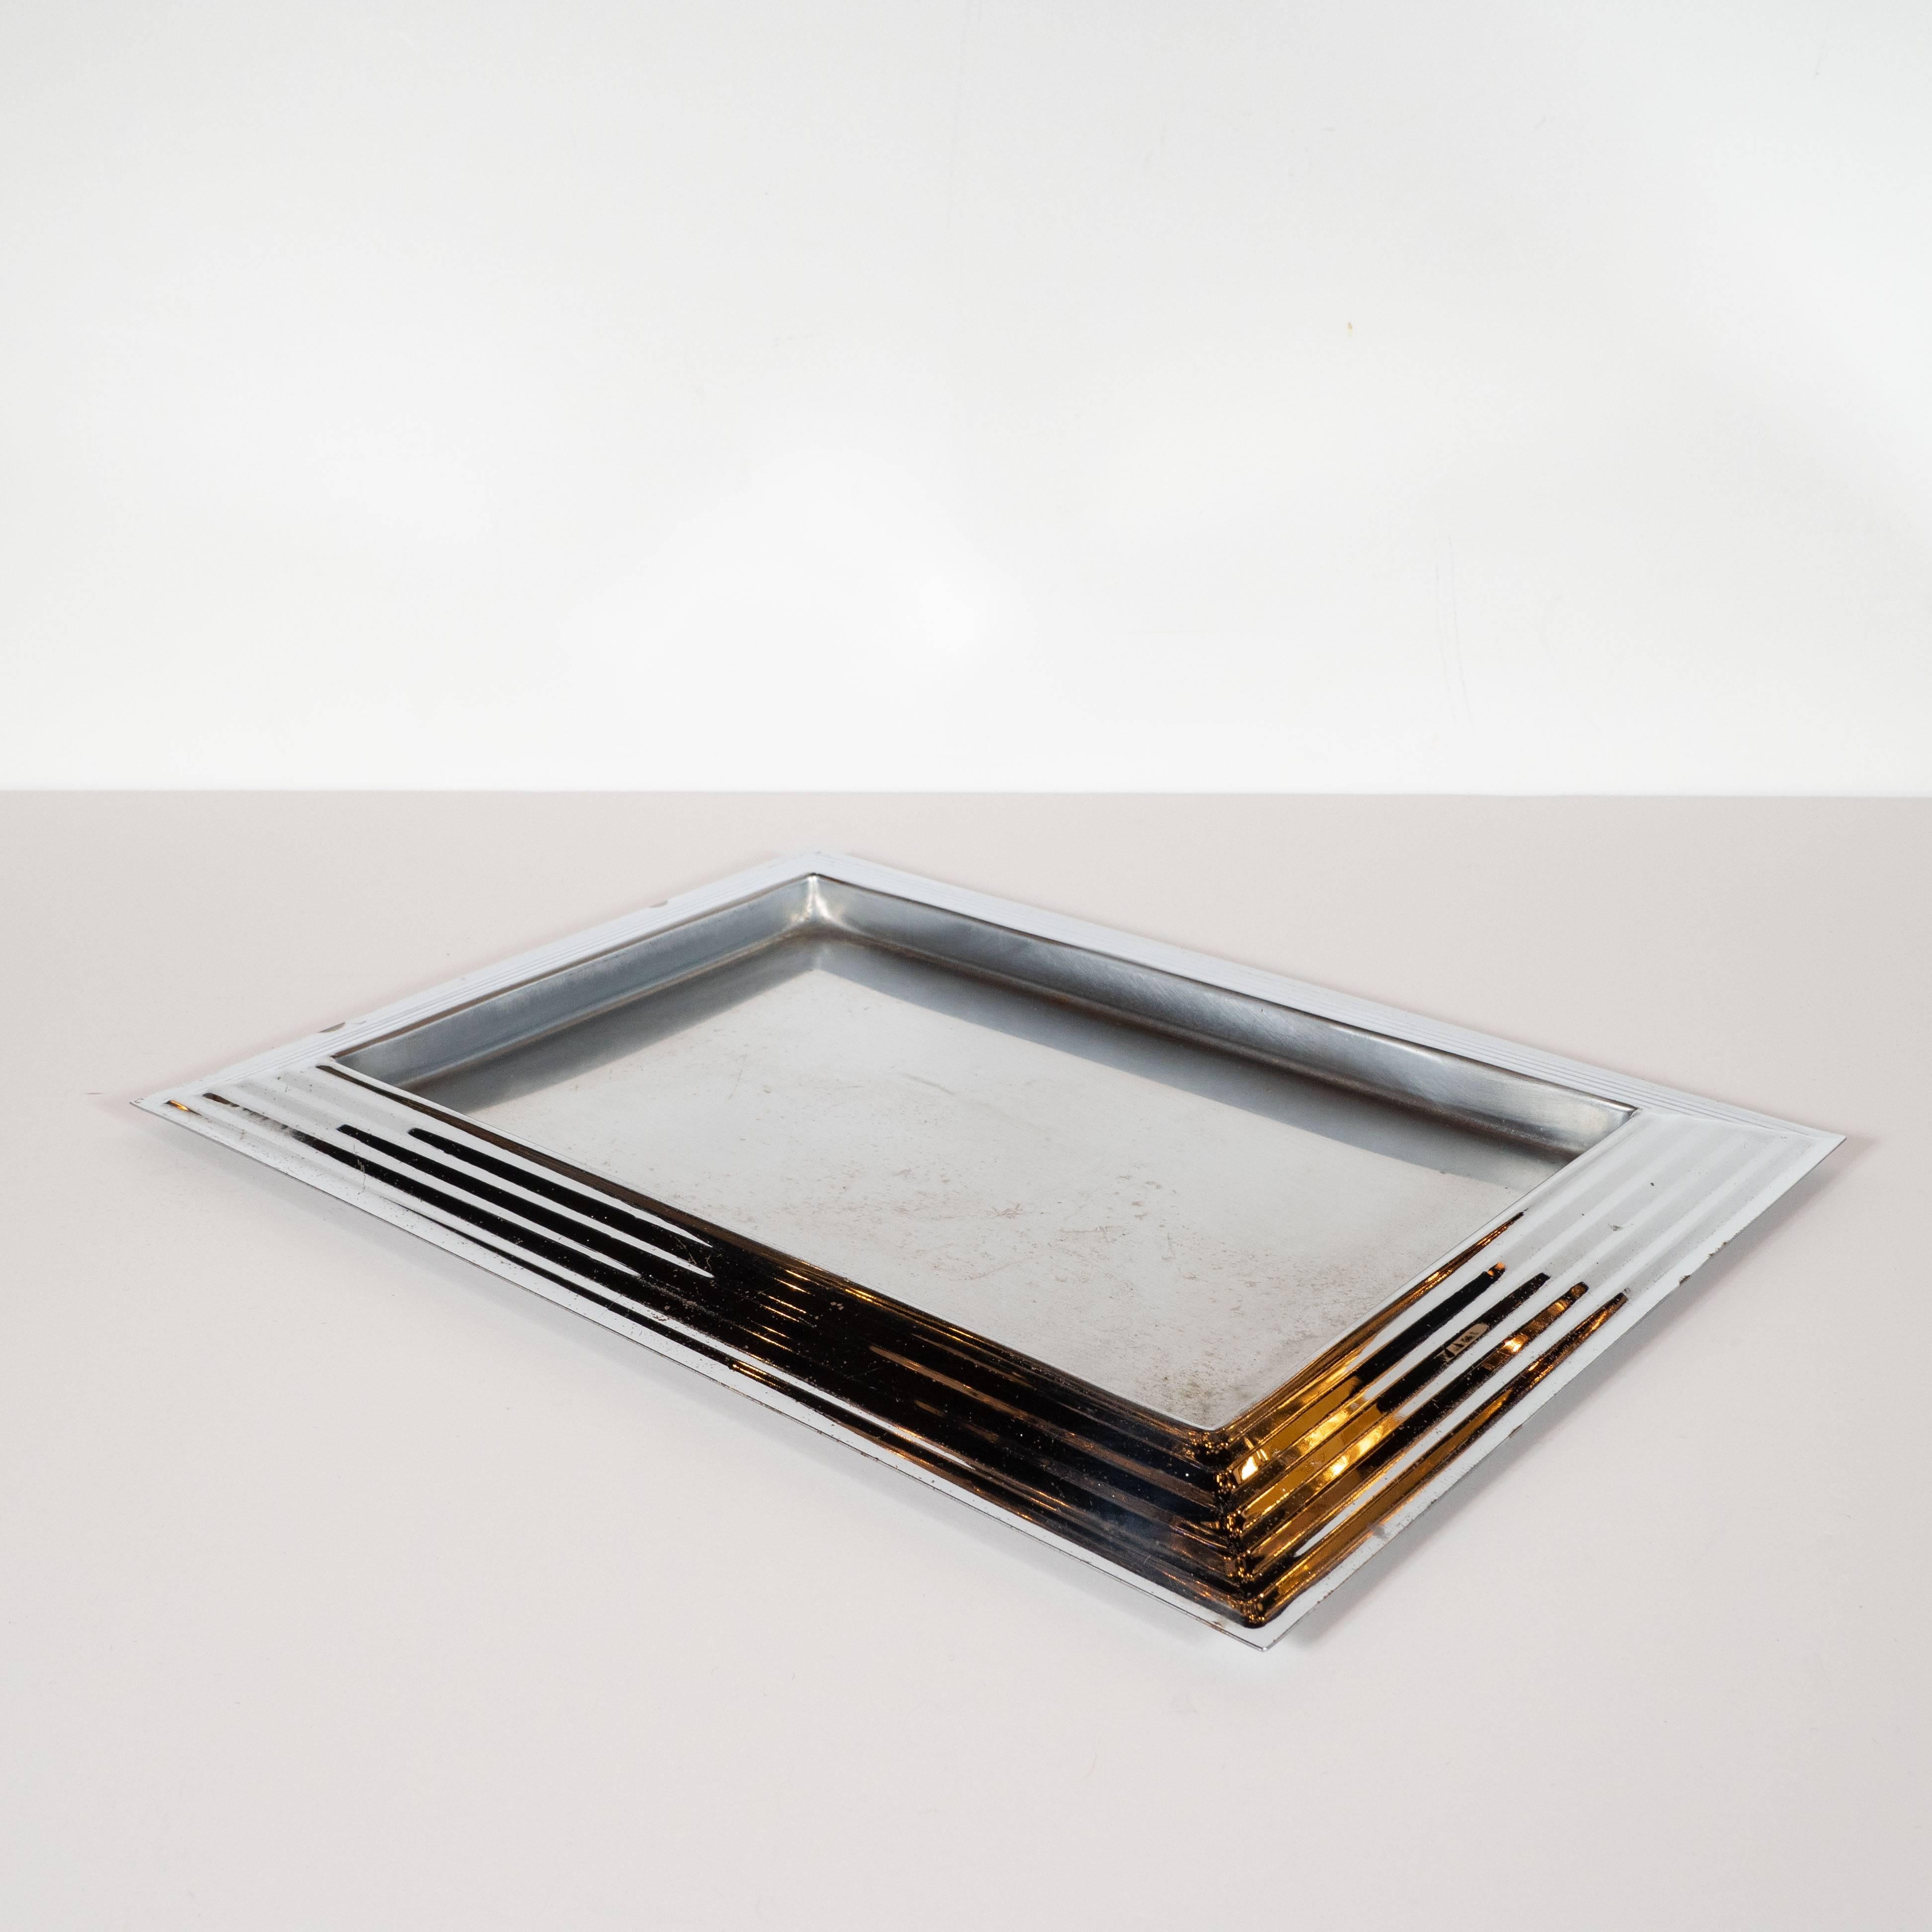 This handsome bar tray was realized in the United States, circa 1935, by the esteemed Revere Co. It features a rectangular form with a skyscraper style perimeter descending in height to the edge in banded steps. With its austere form and clean